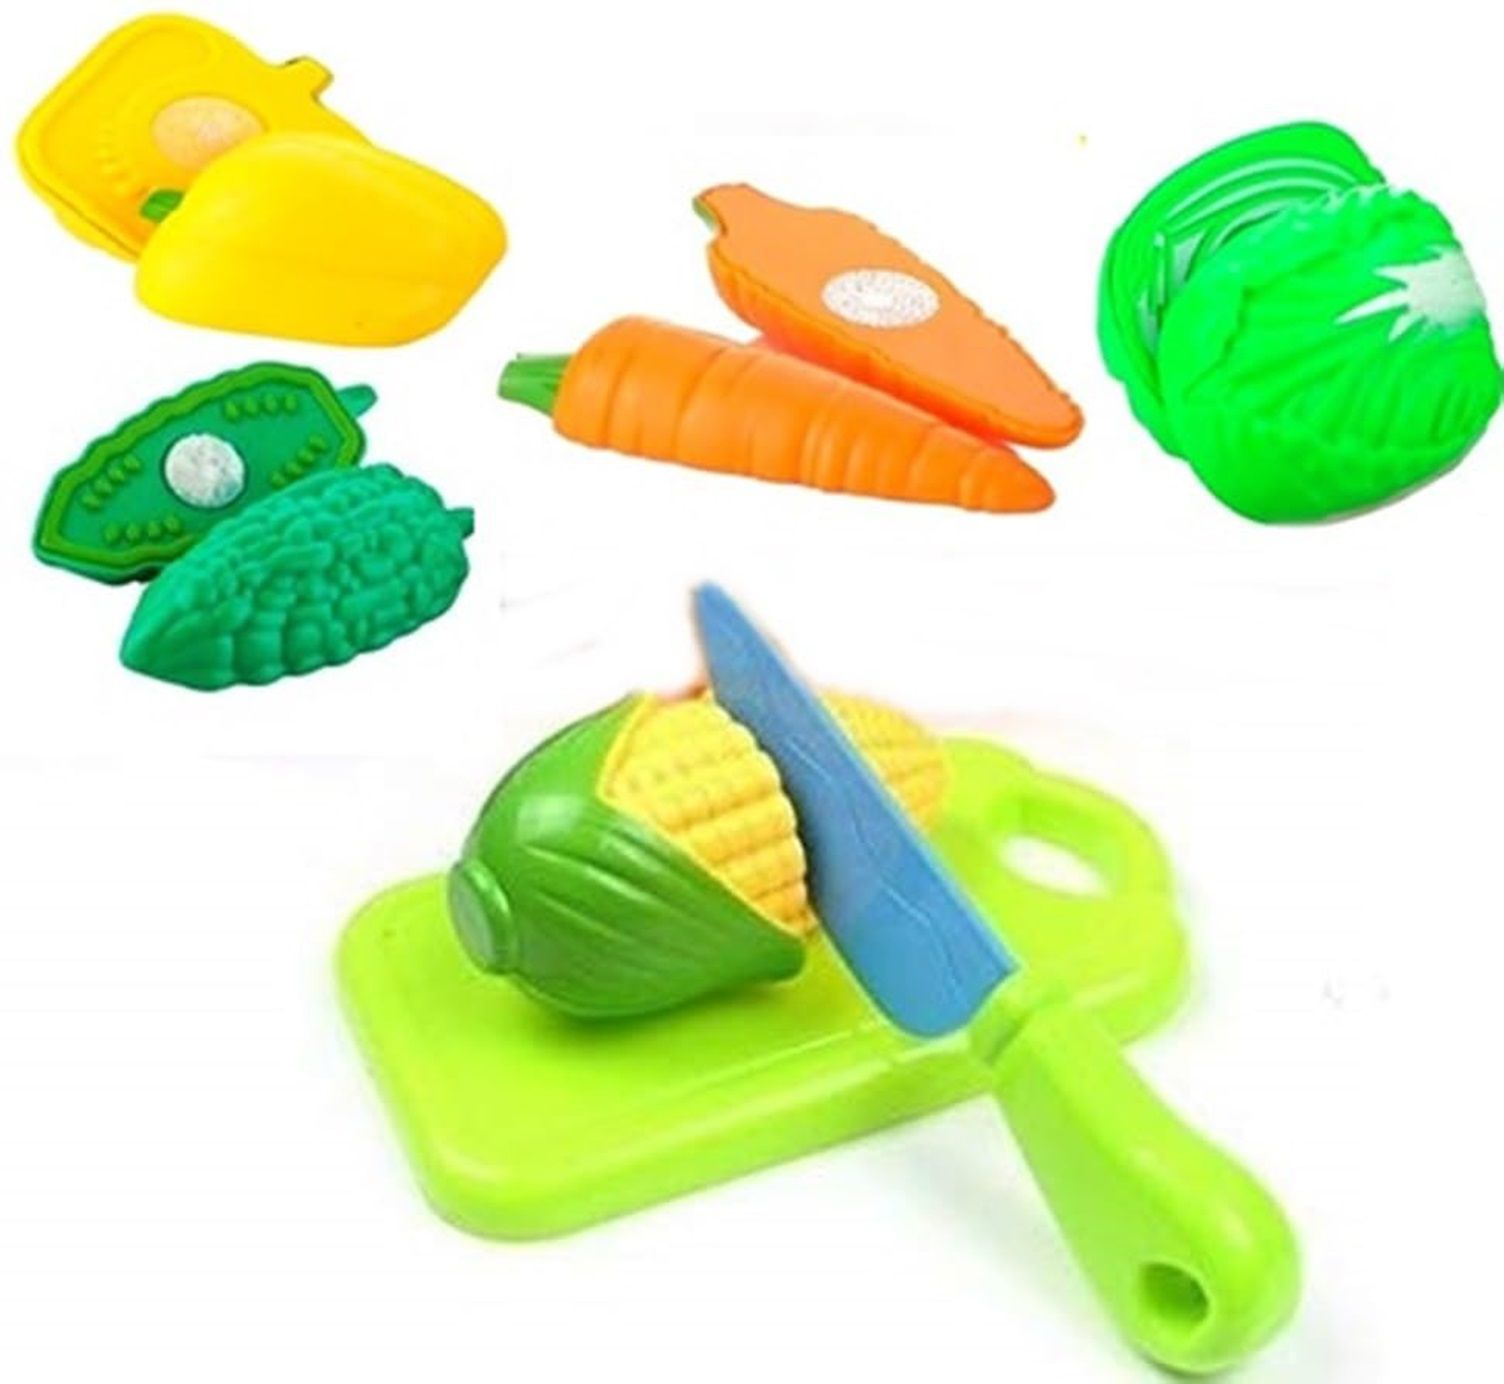     			Fratelli Play Food Realistic Vegetables Cut Set with Cutting Board & Knife Toy for Kids,Multicolor(5ps Vegetables,Chopping Board & Knife Toy)